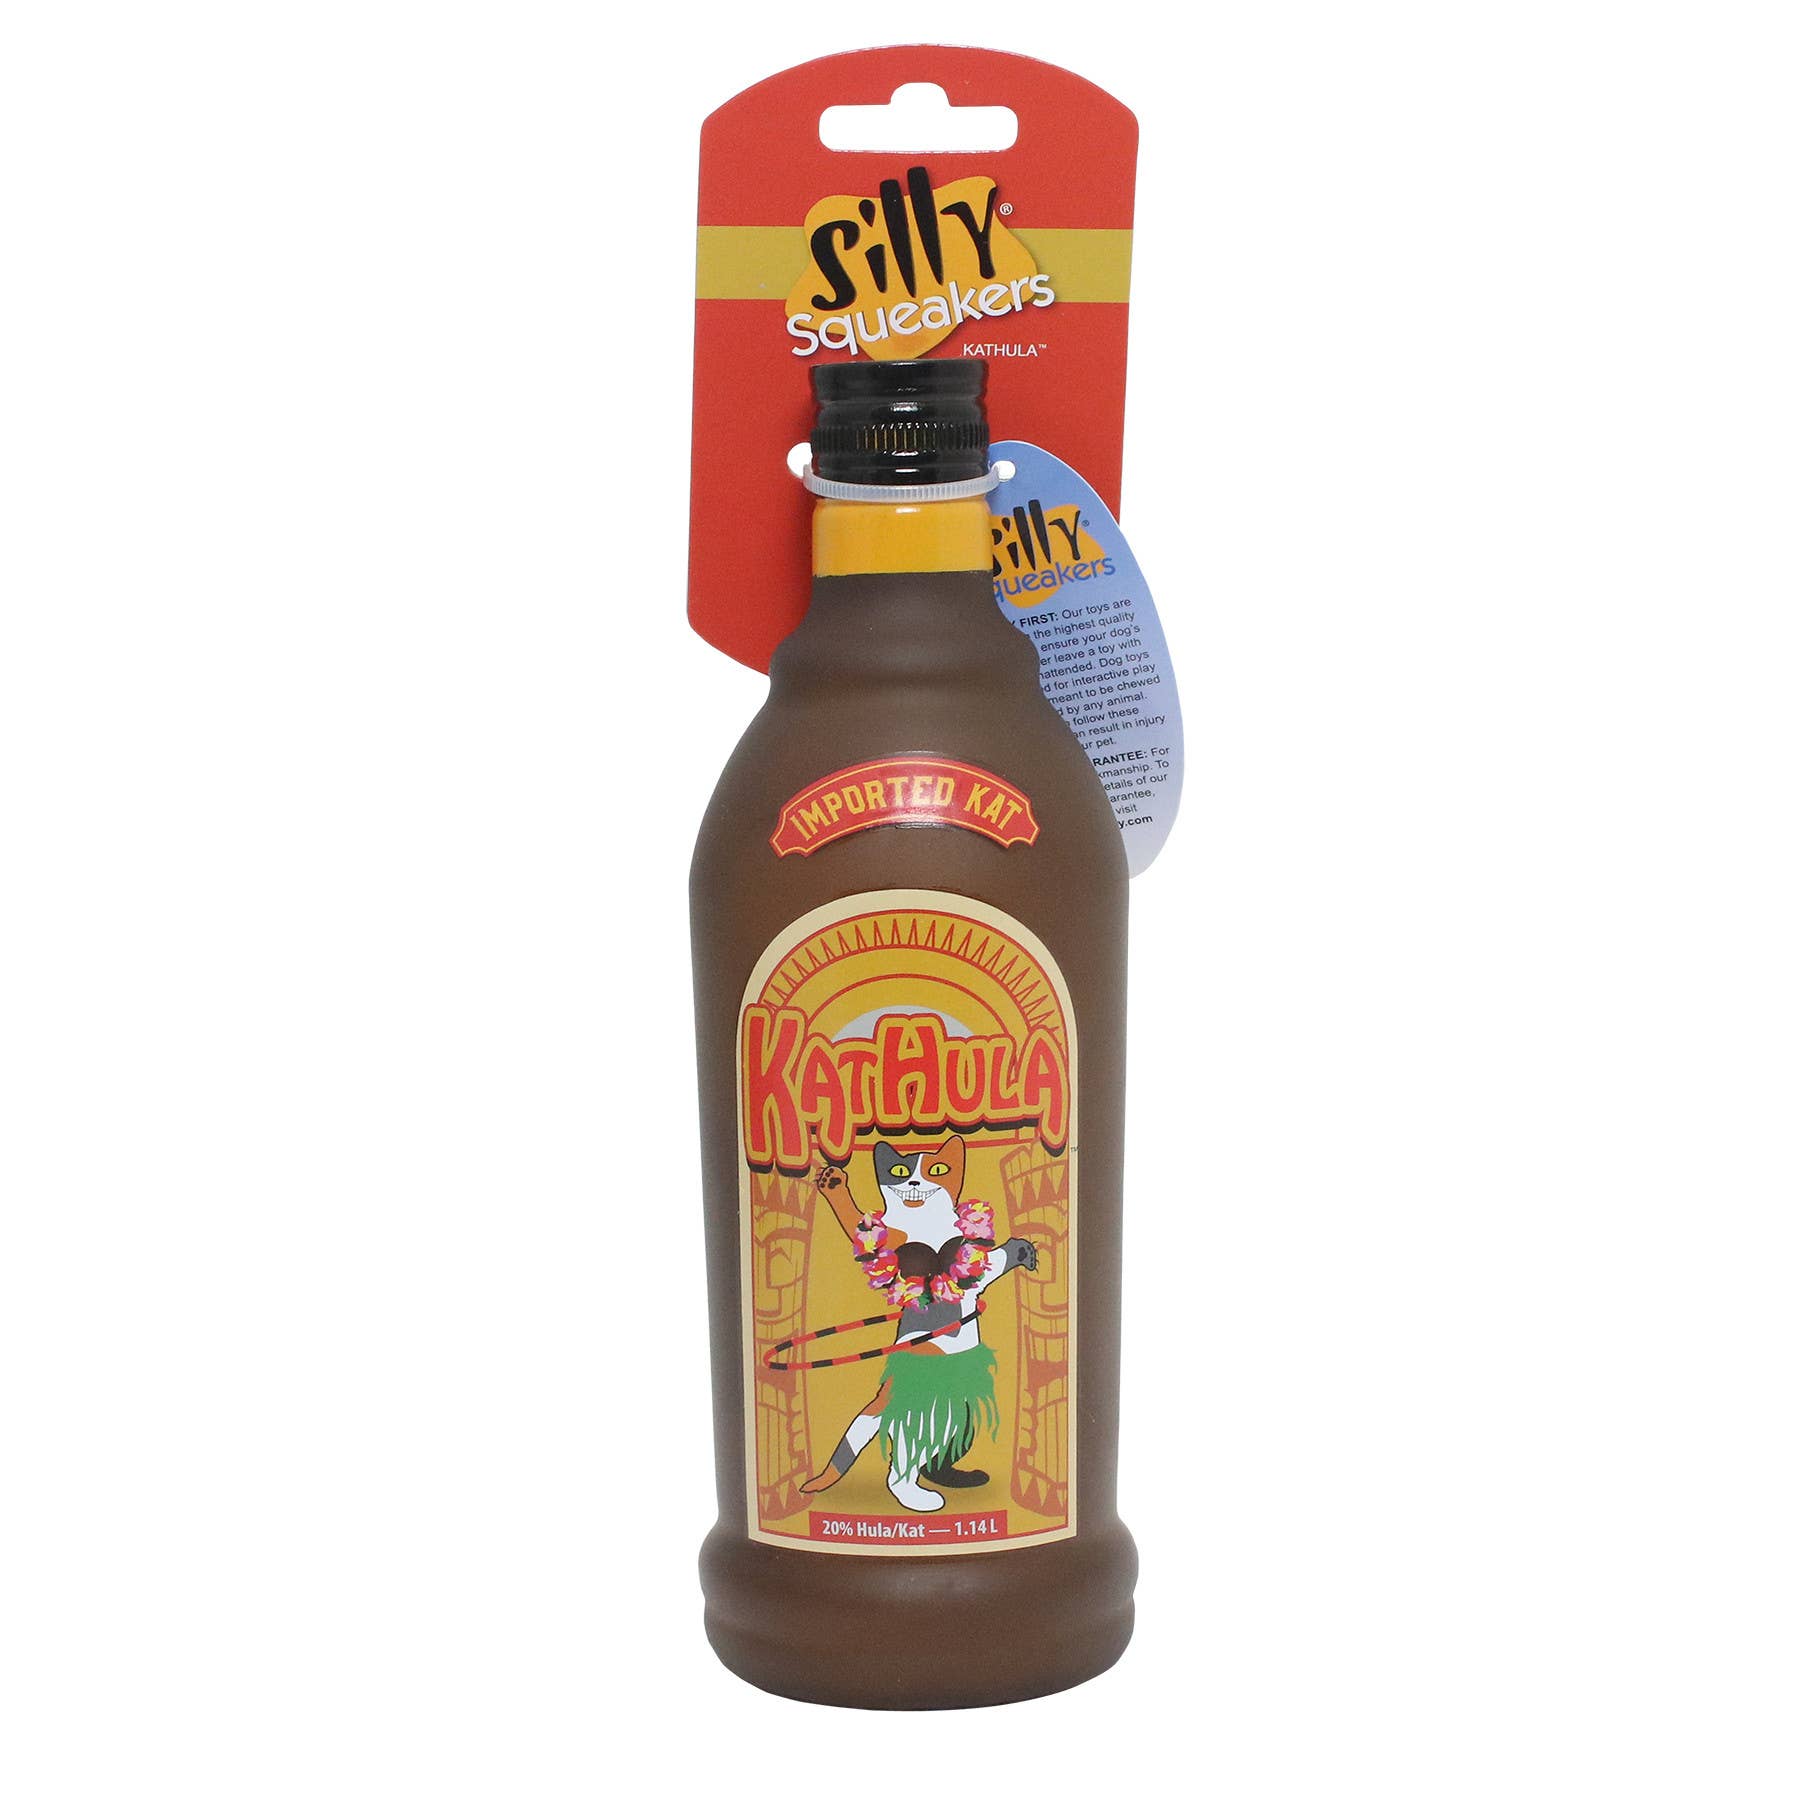 Silly Squeaker Liquor Bottle KatHula, Squeaky Dog Toy